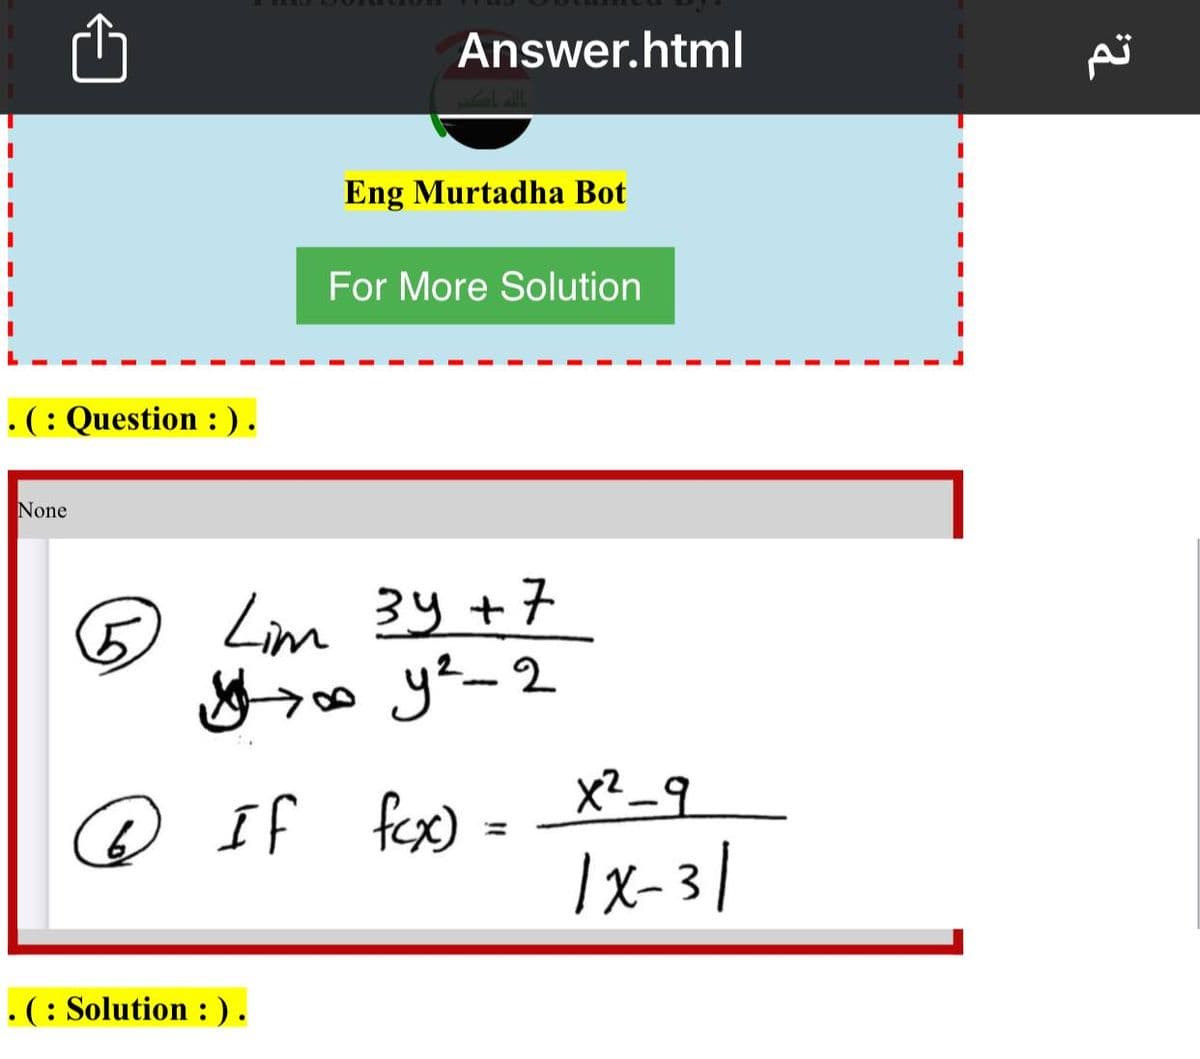 Answer.html
Eng Murtadha Bot
For More Solution
.(: Question : ).
None
® Lim 34 +7
2
@ If
fex)
x?_9
%3D
I x-3 |
.(: Solution :).
